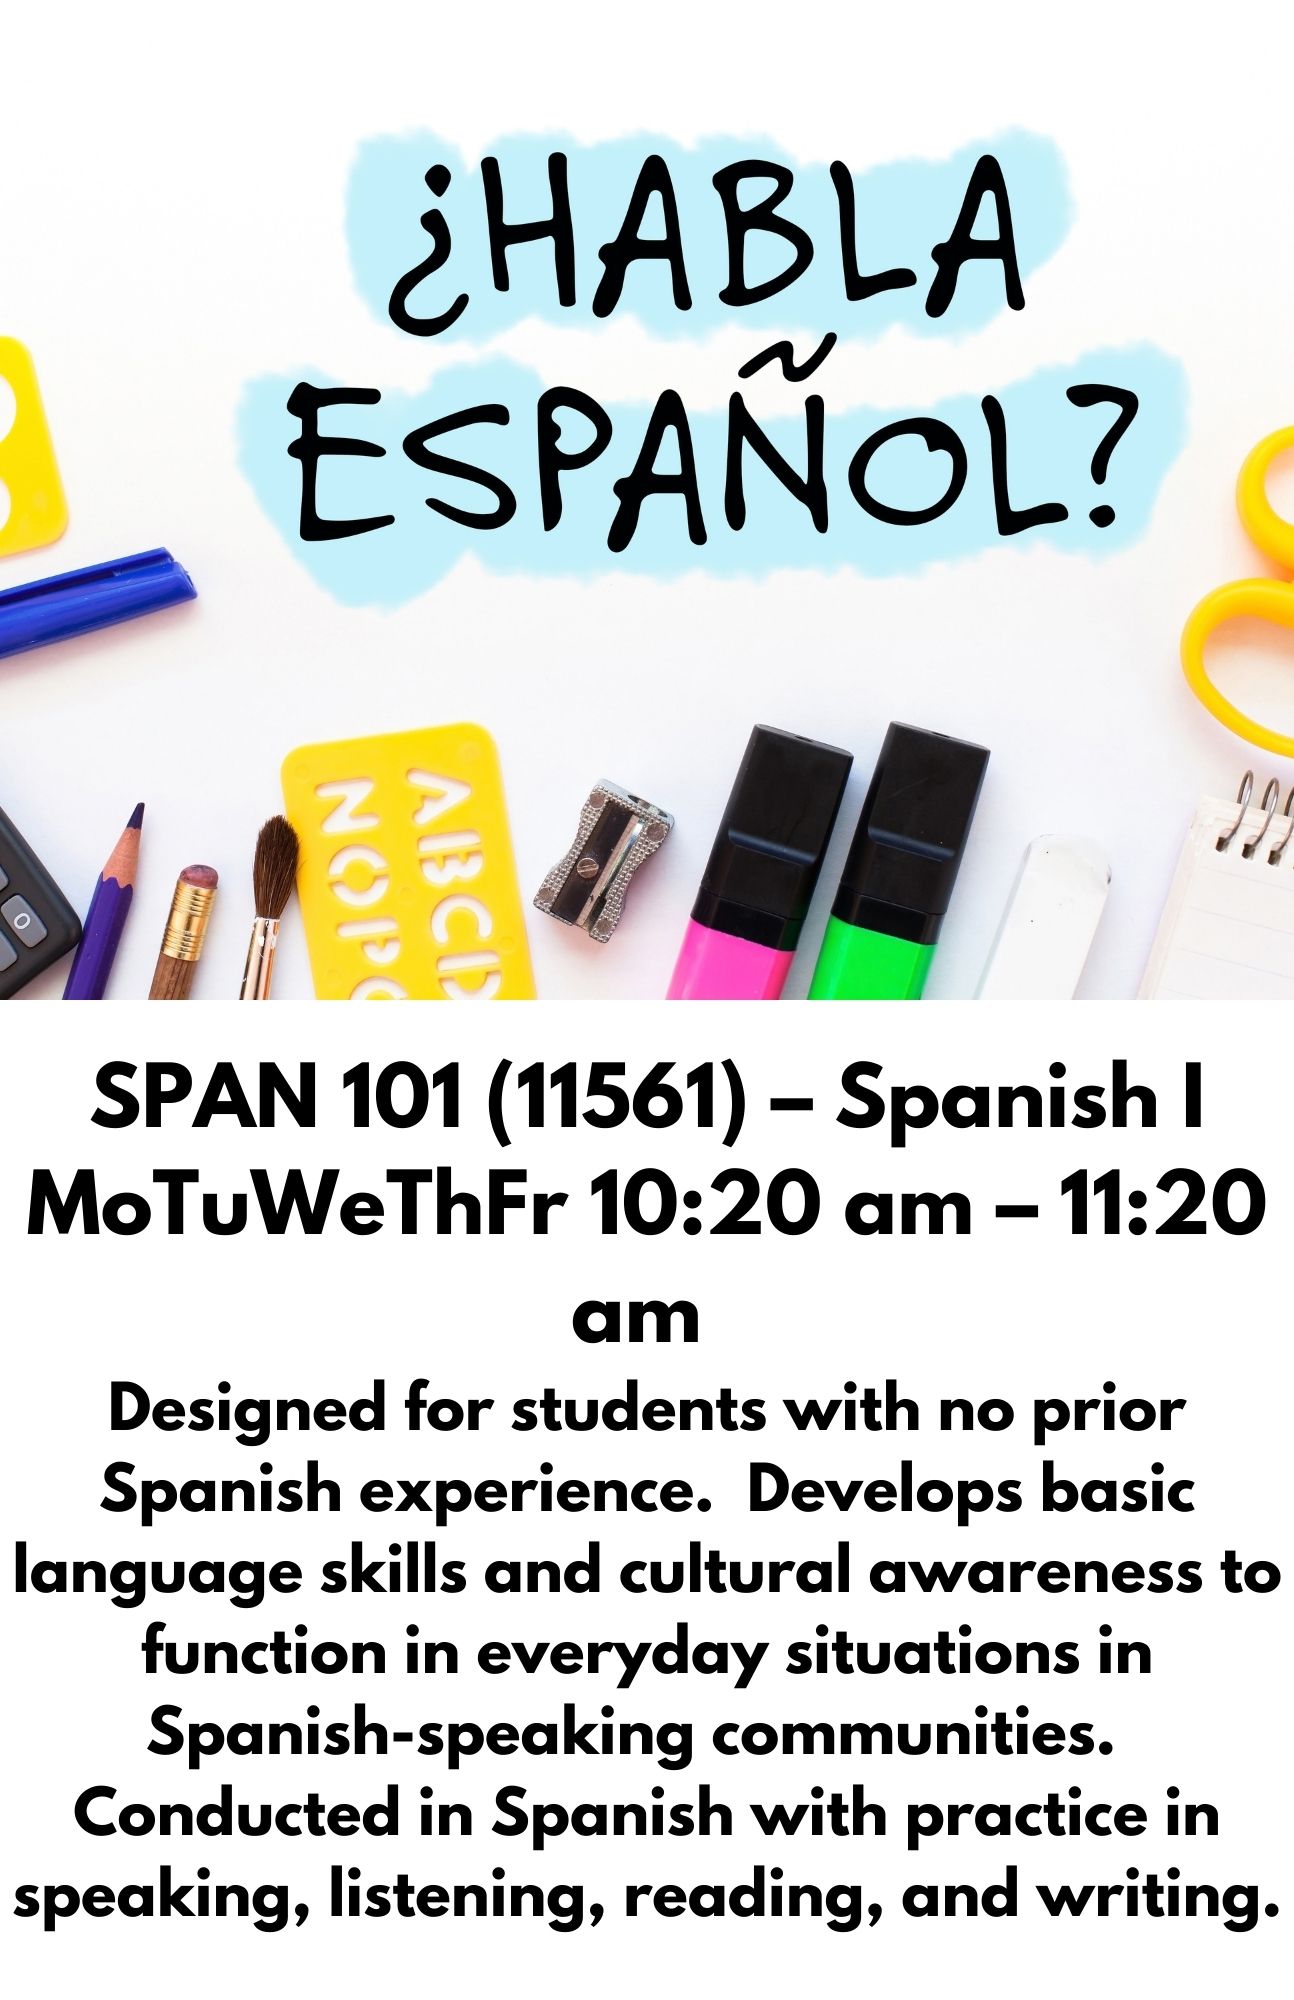 SPAN 101 (11561) – Spanish I MoTuWeThFr 10:20 am – 11:20 am  Designed for students with no prior Spanish experience.  Develops basic language skills and cultural awareness to function in everyday situations in Spanish-speaking communities.  Conducted in Spanish with practice in speaking, listening, reading, and writing.